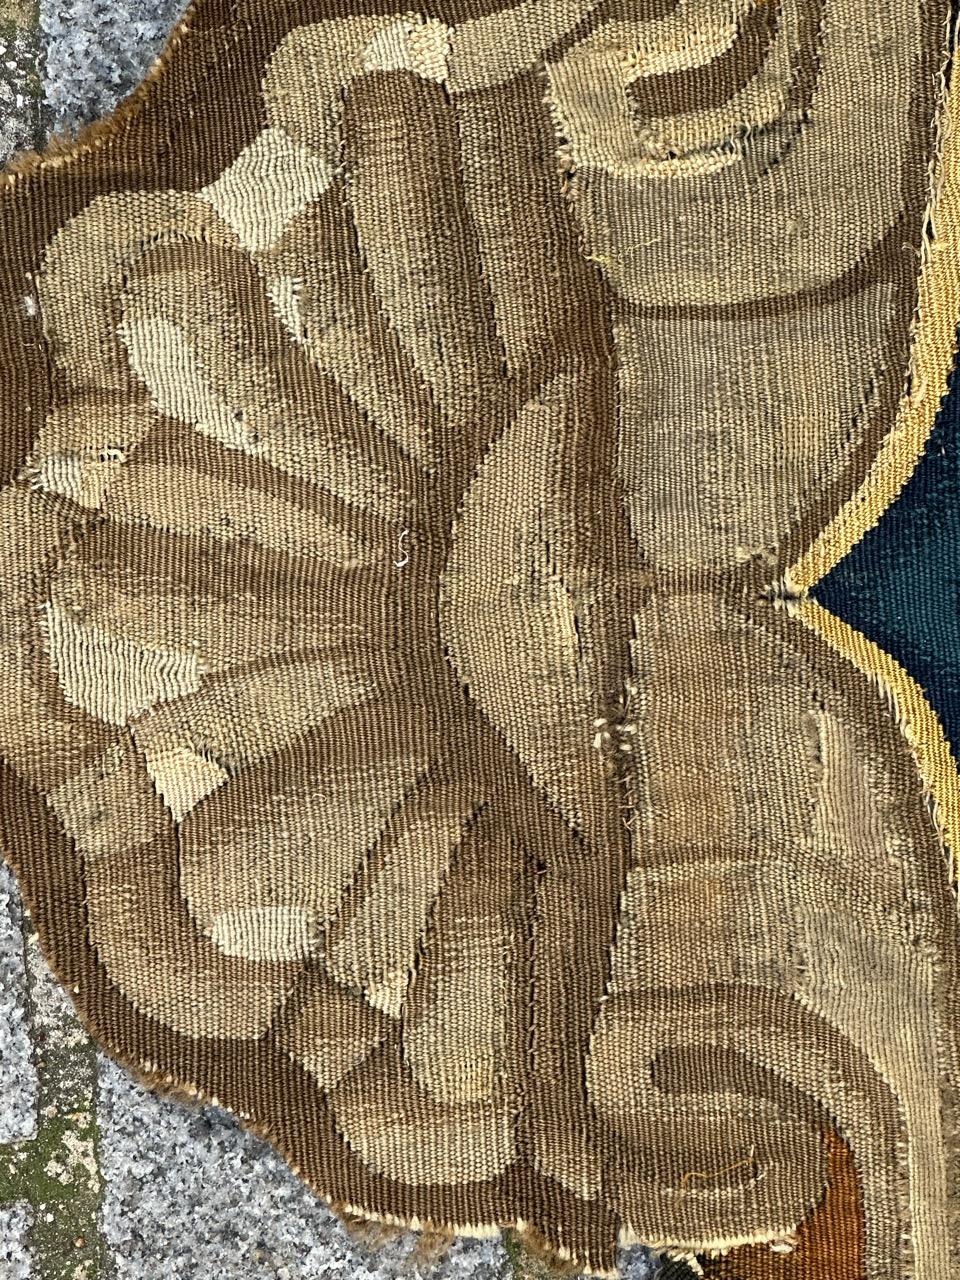 Very beautiful Belgium Bruxelles 17th century tapestry fragment with beautiful colours, maybe used for a document or be framed .